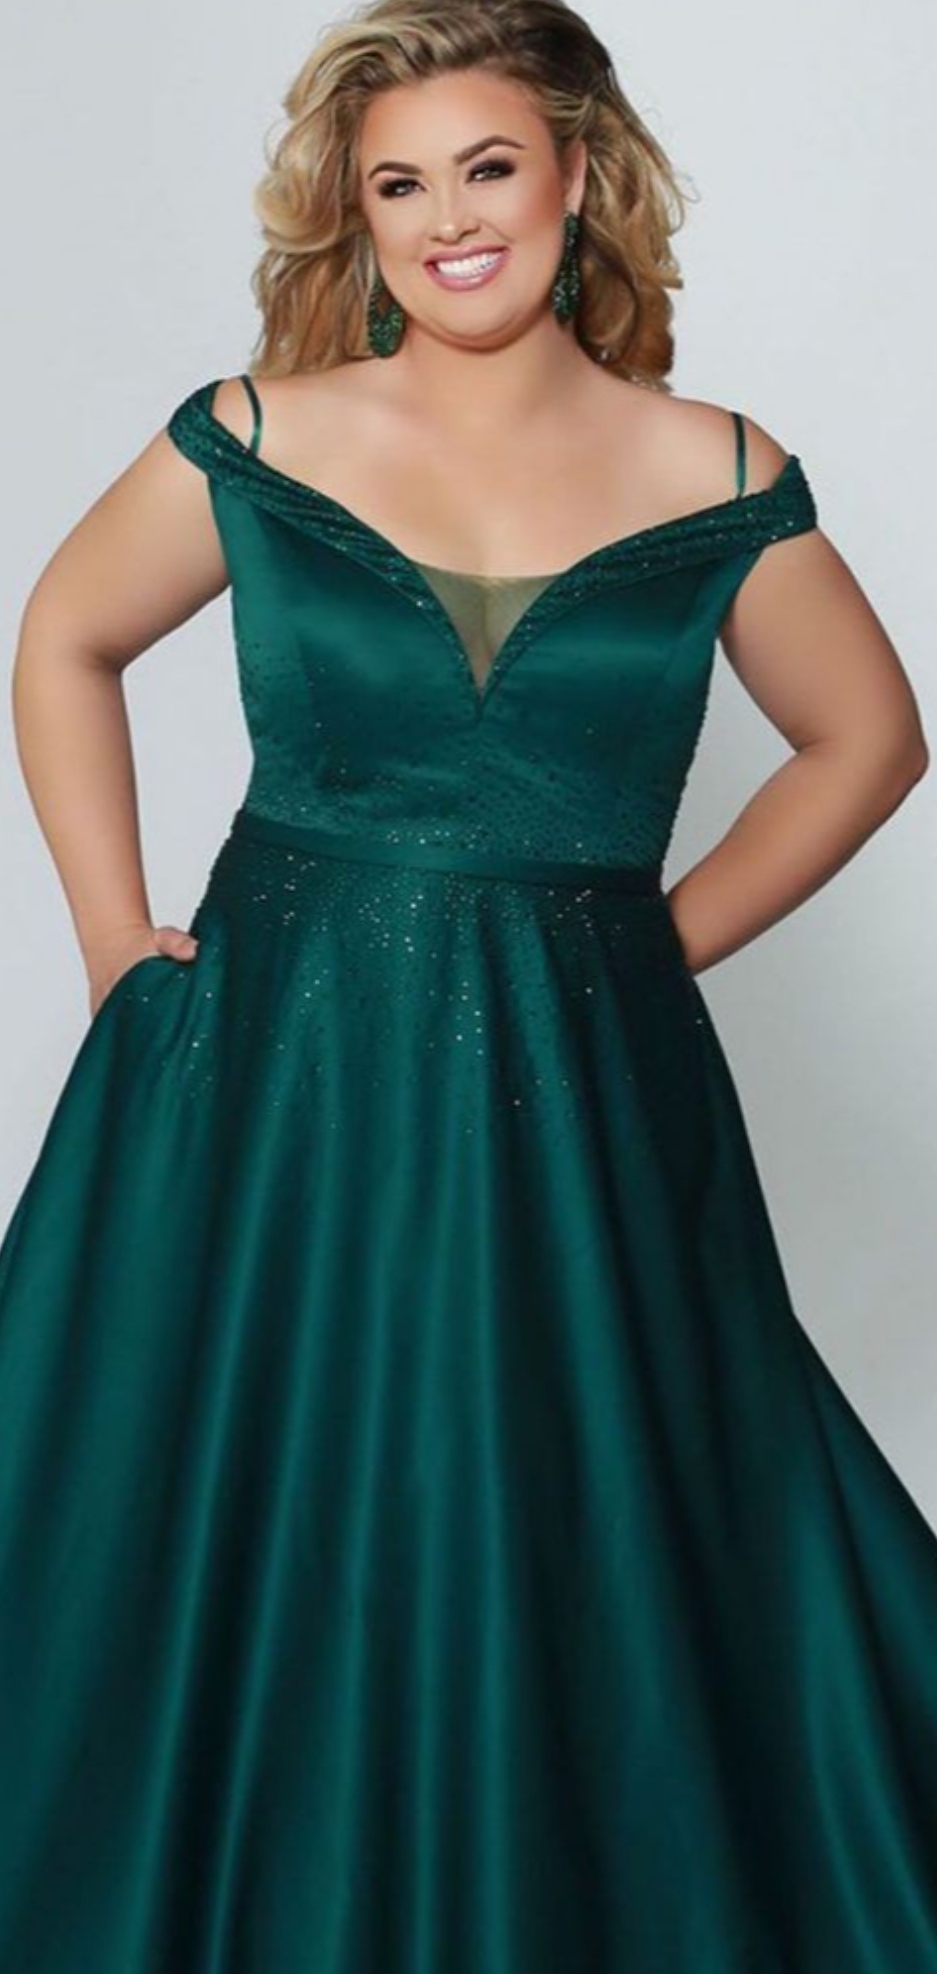 Plus Size Mother Of The Bride Dresses